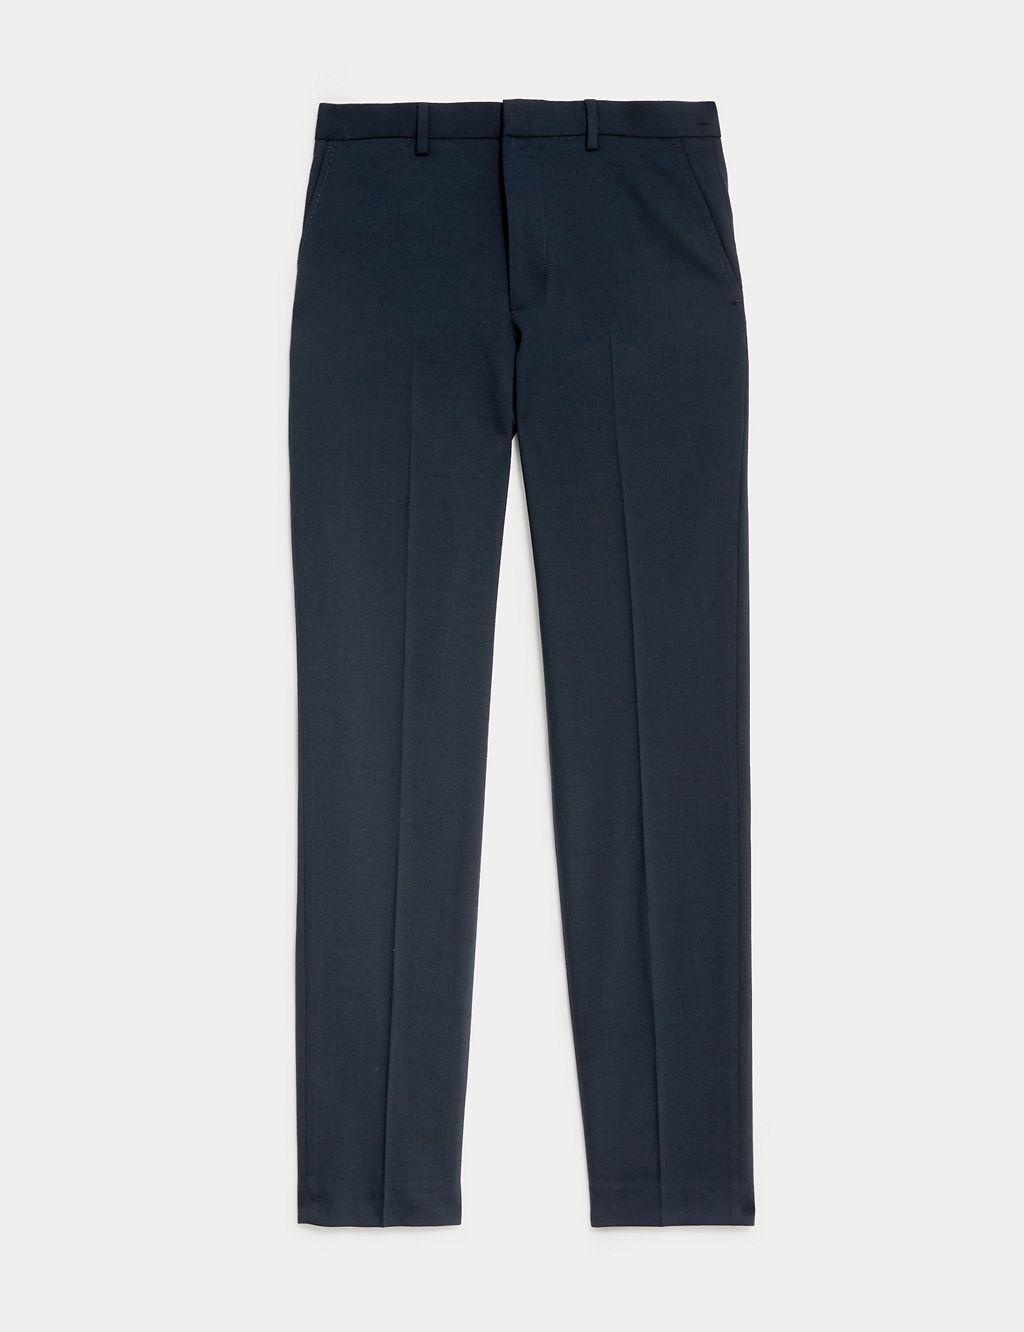 Wool Blend Flat Front Stretch Trousers 5 of 7